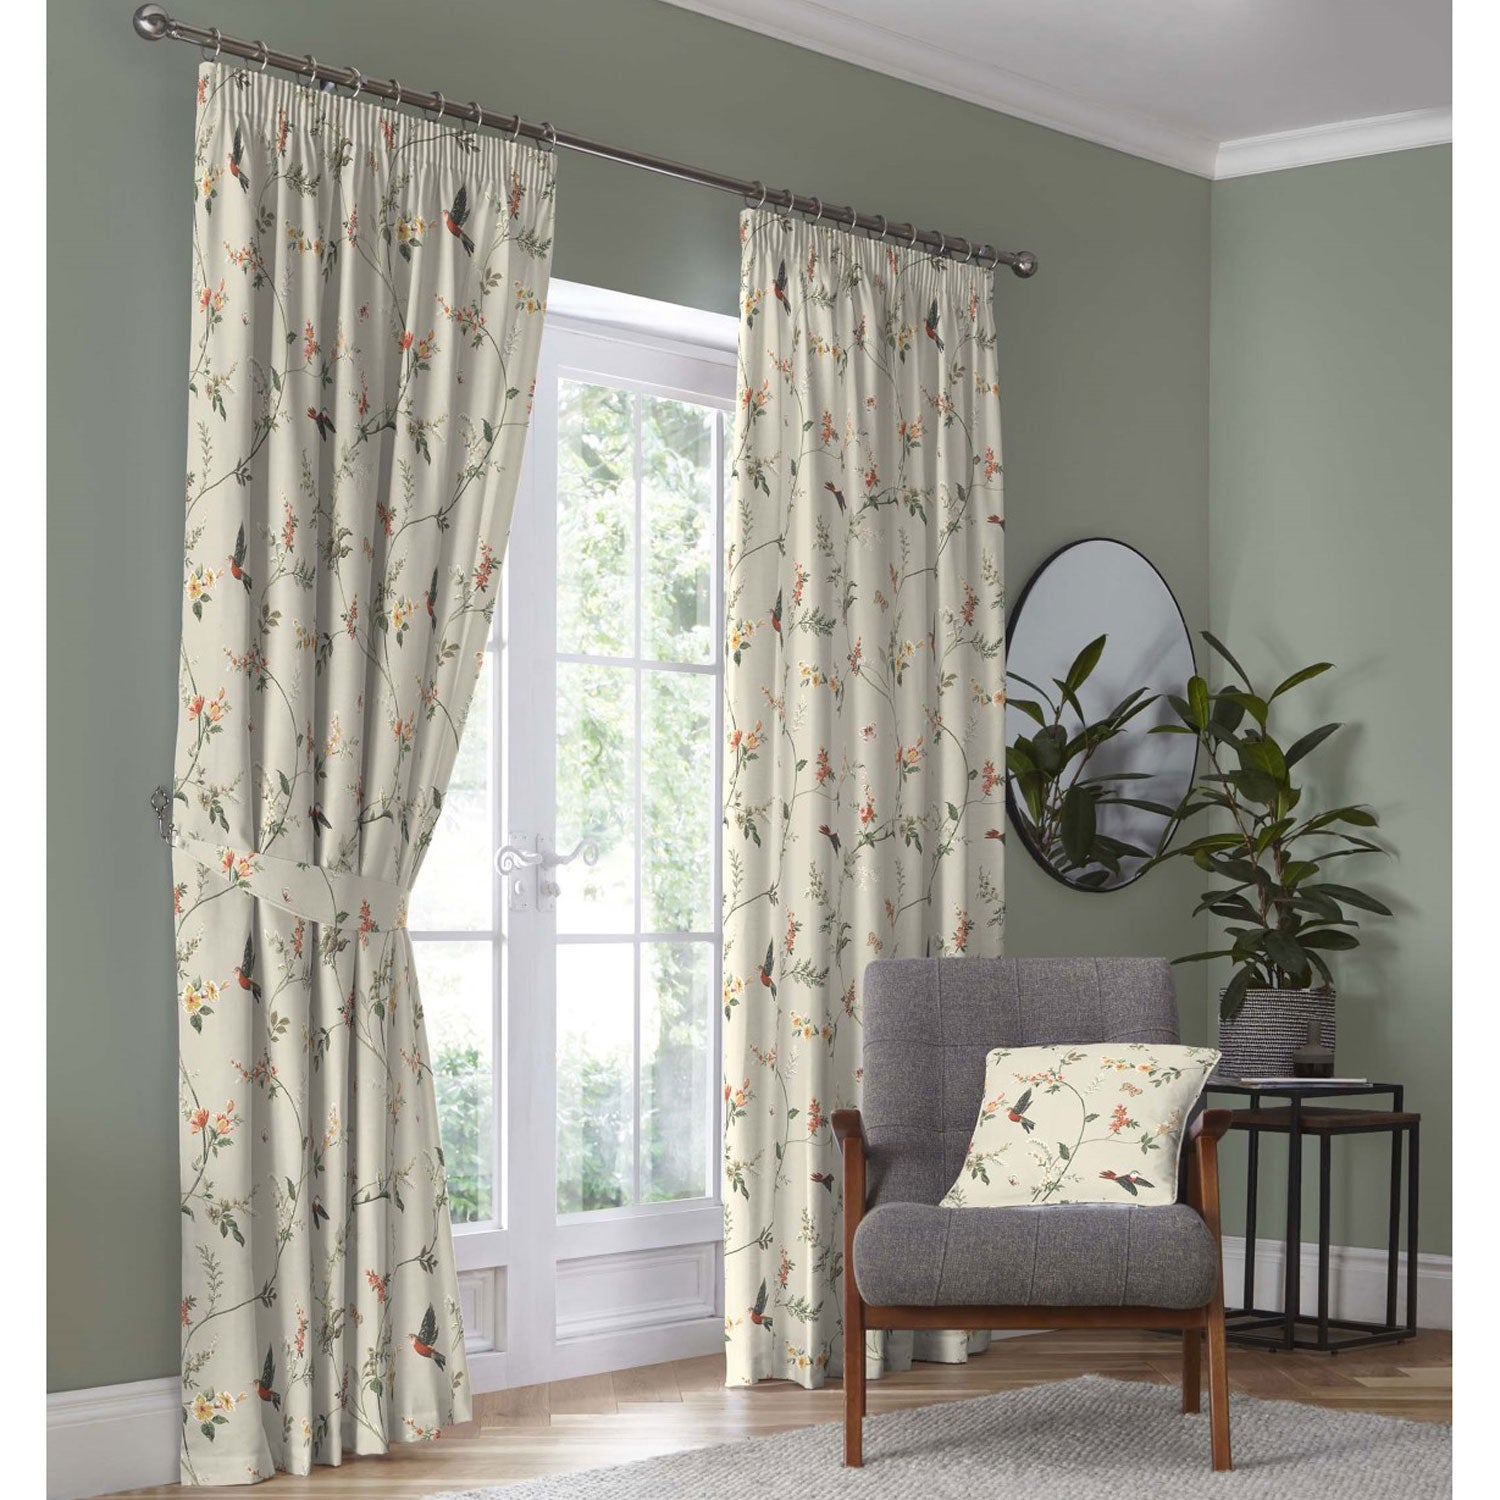 The Home Bedroom Darnley Pencil Pleat Curtains 66 X 72 - Coral 1 Shaws Department Stores